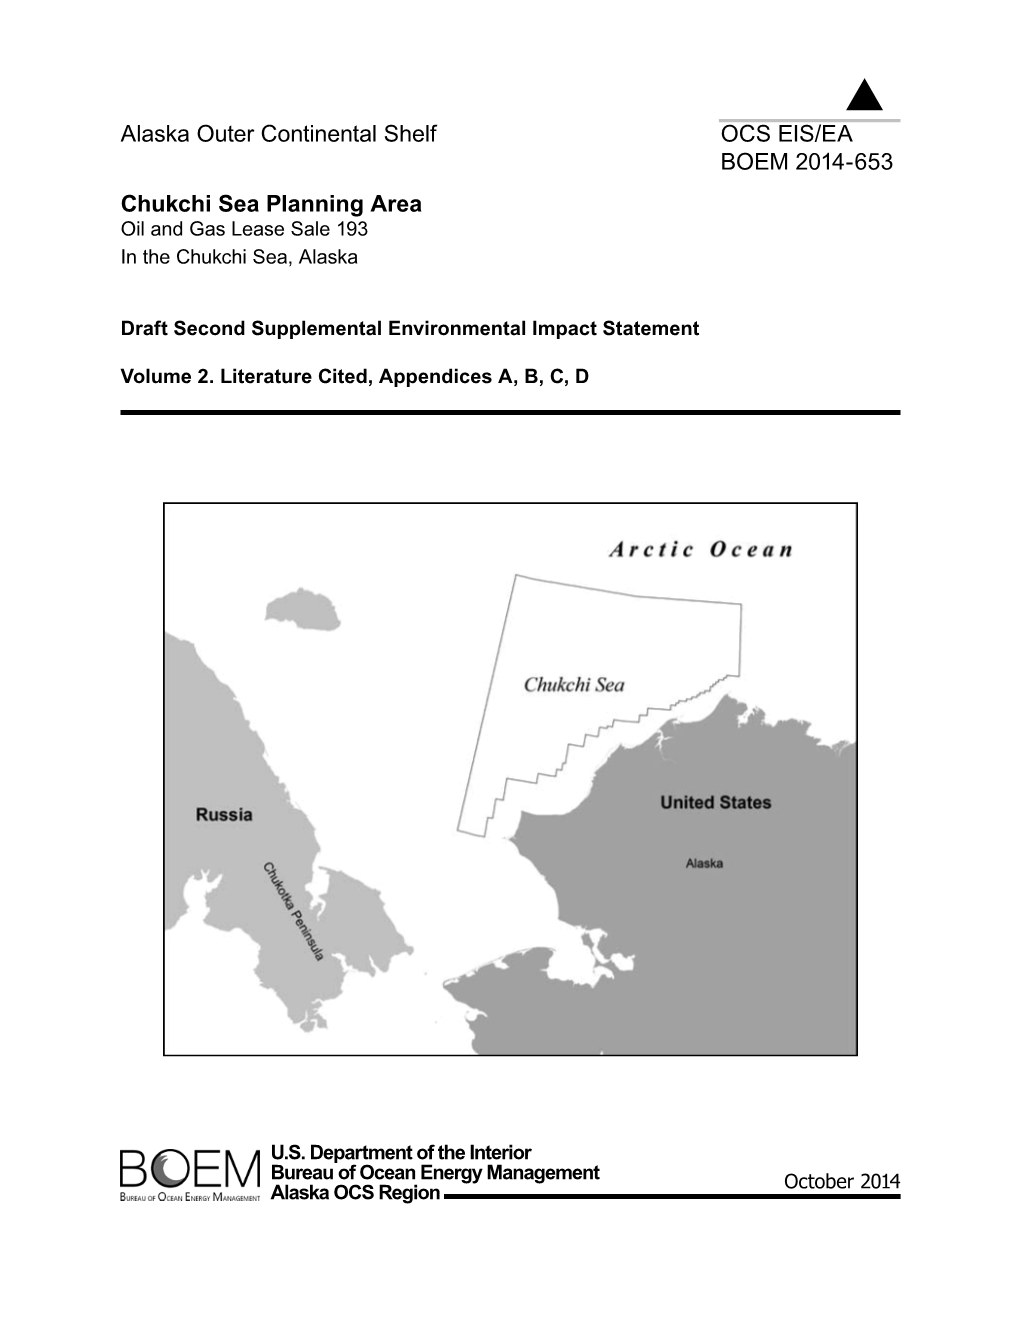 Oil and Gas Lease Sale 193 Draft Second SEIS Vol. 2